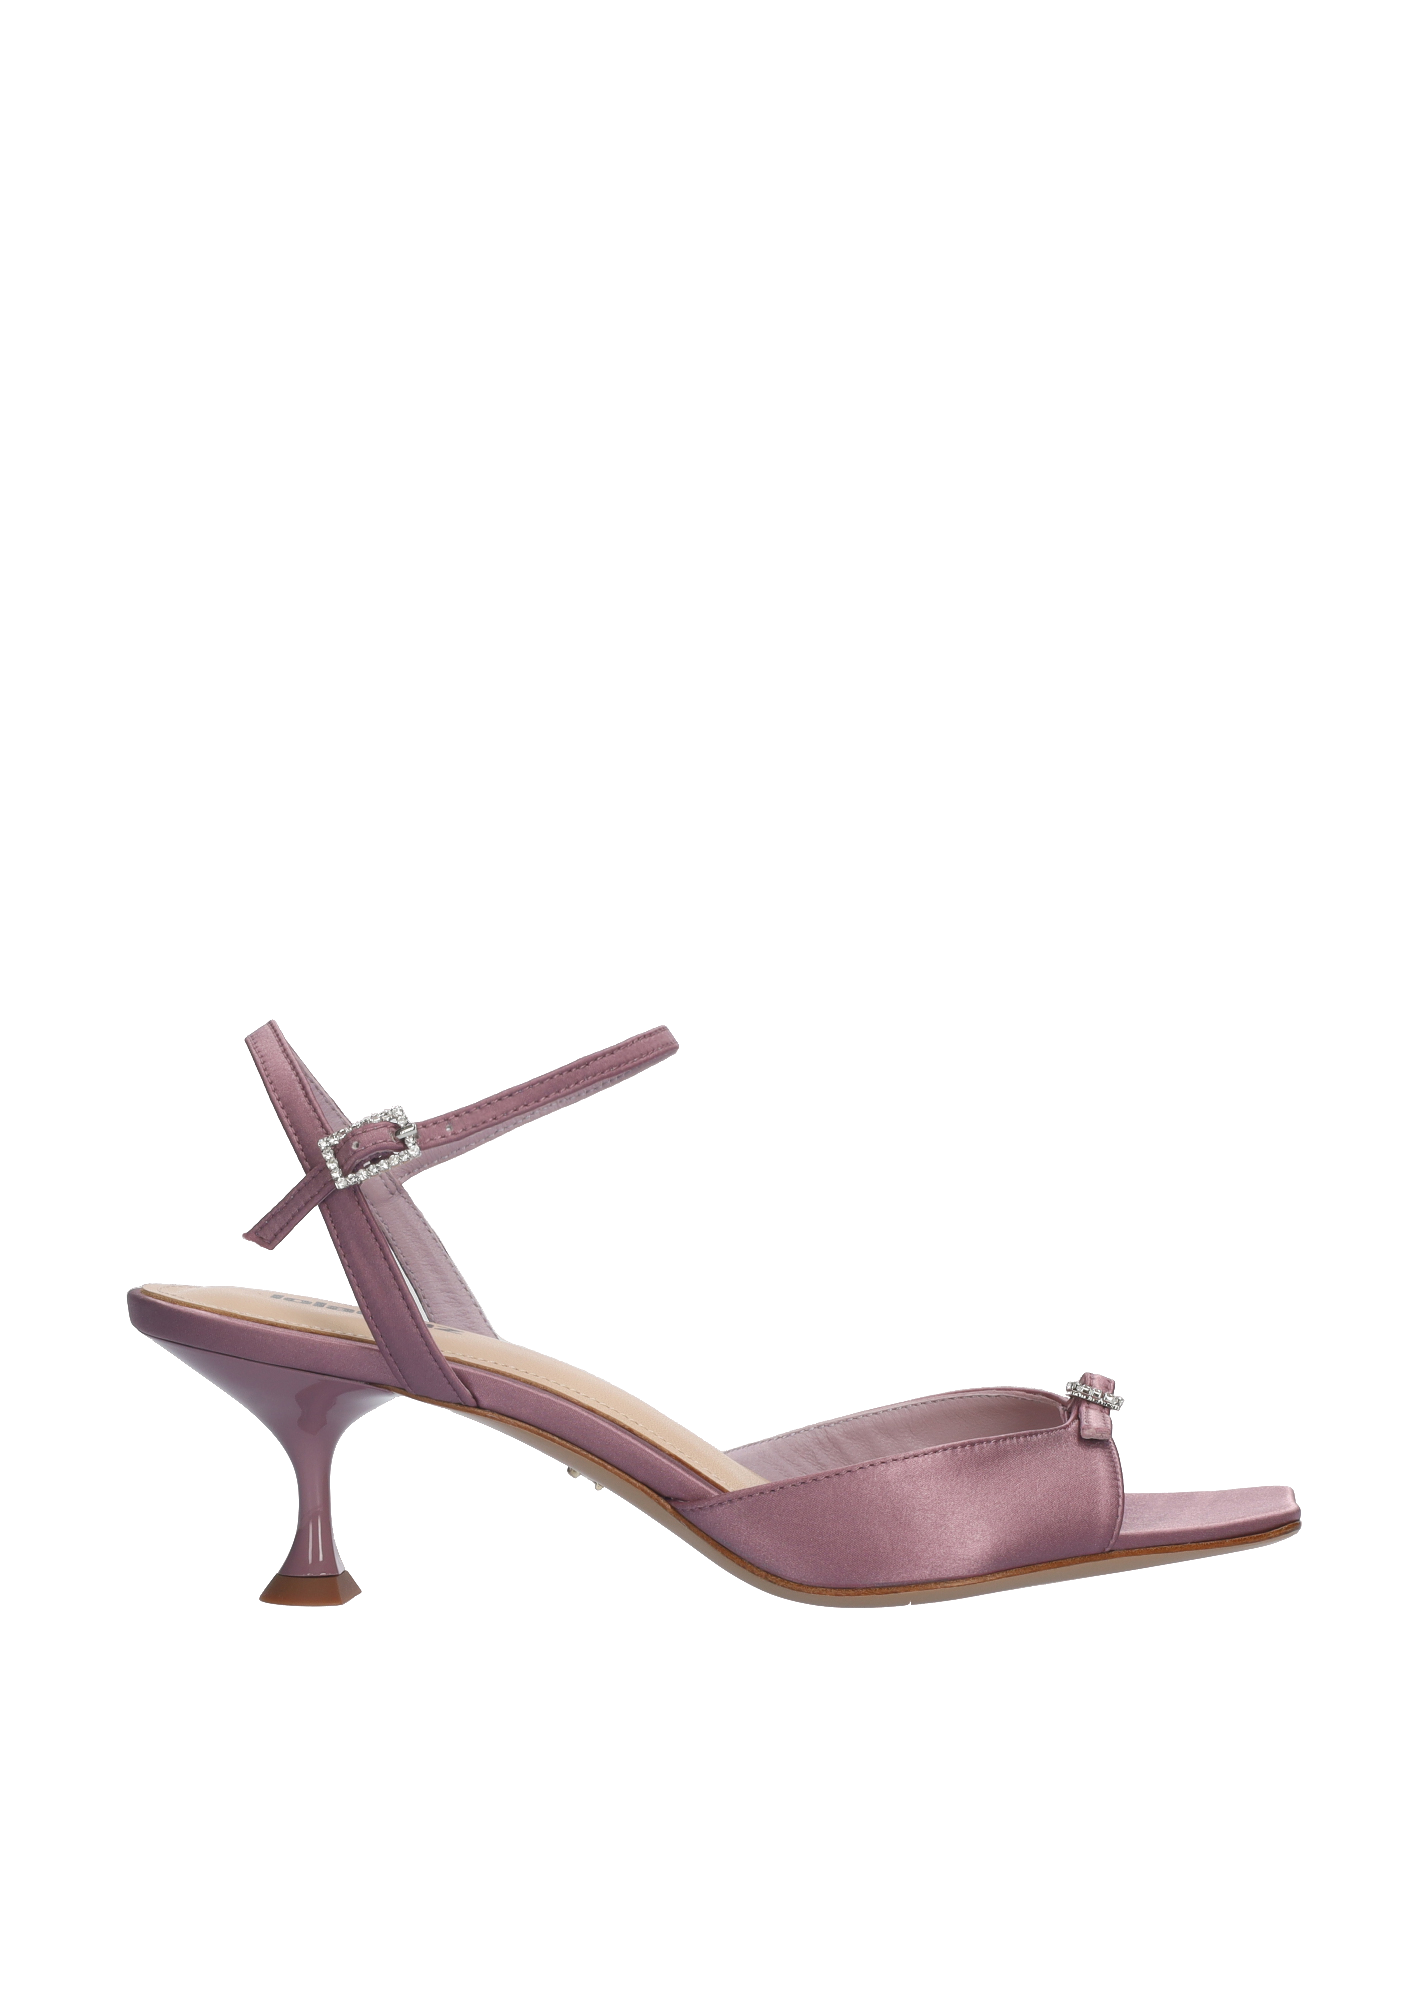 Lola Cruz Shoes From Sandals 55 In Purple